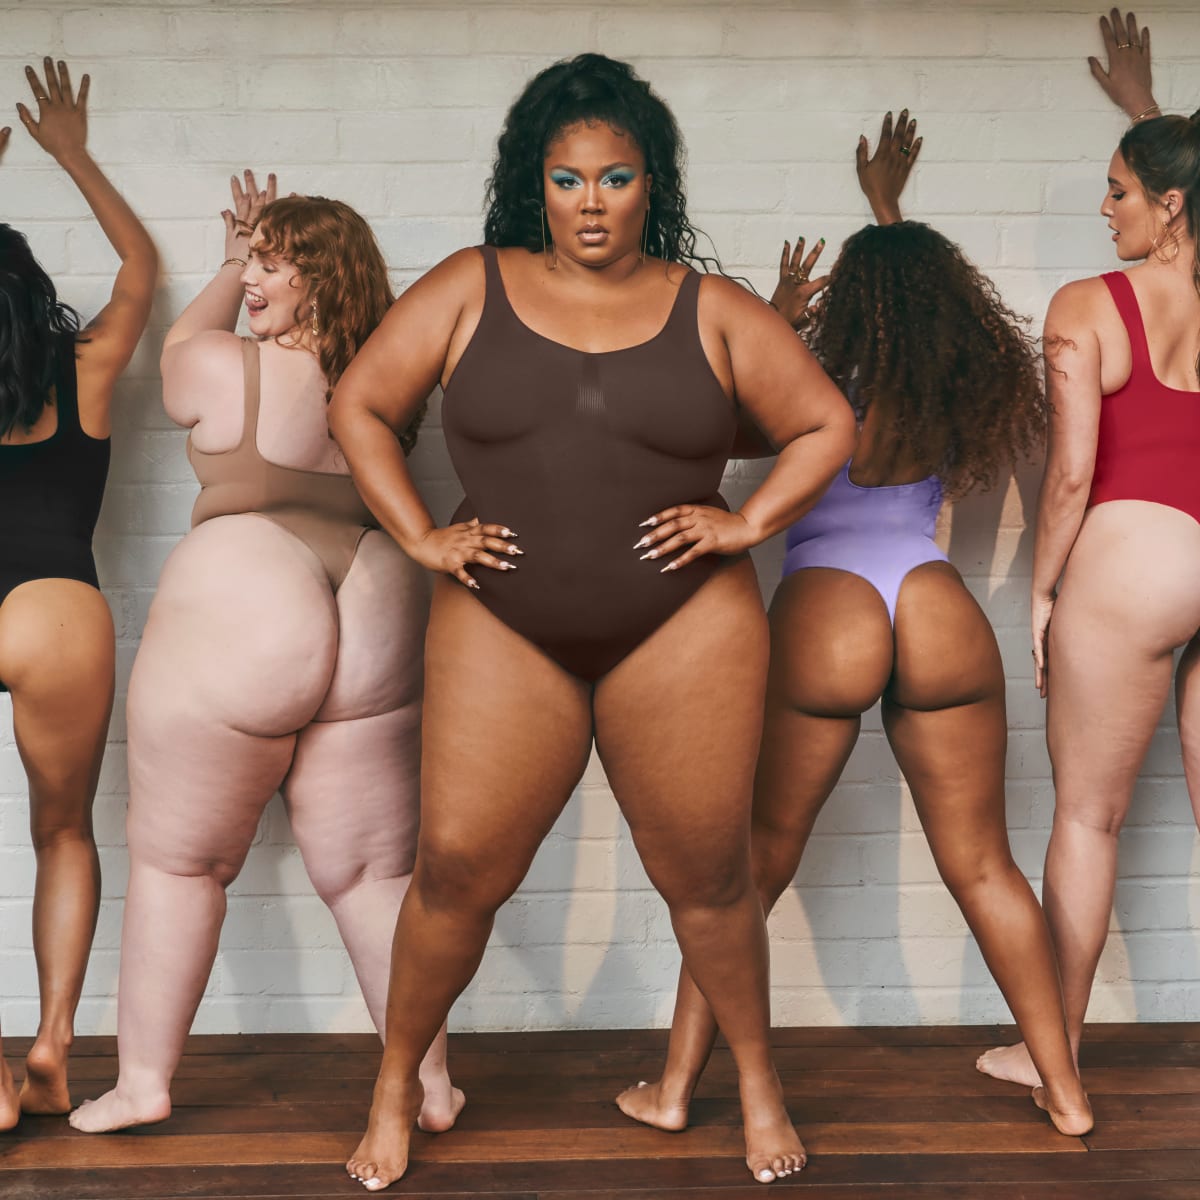 Lizzo shows off her curves while modeling bra and underwear sets from her  shapewear line Yitty